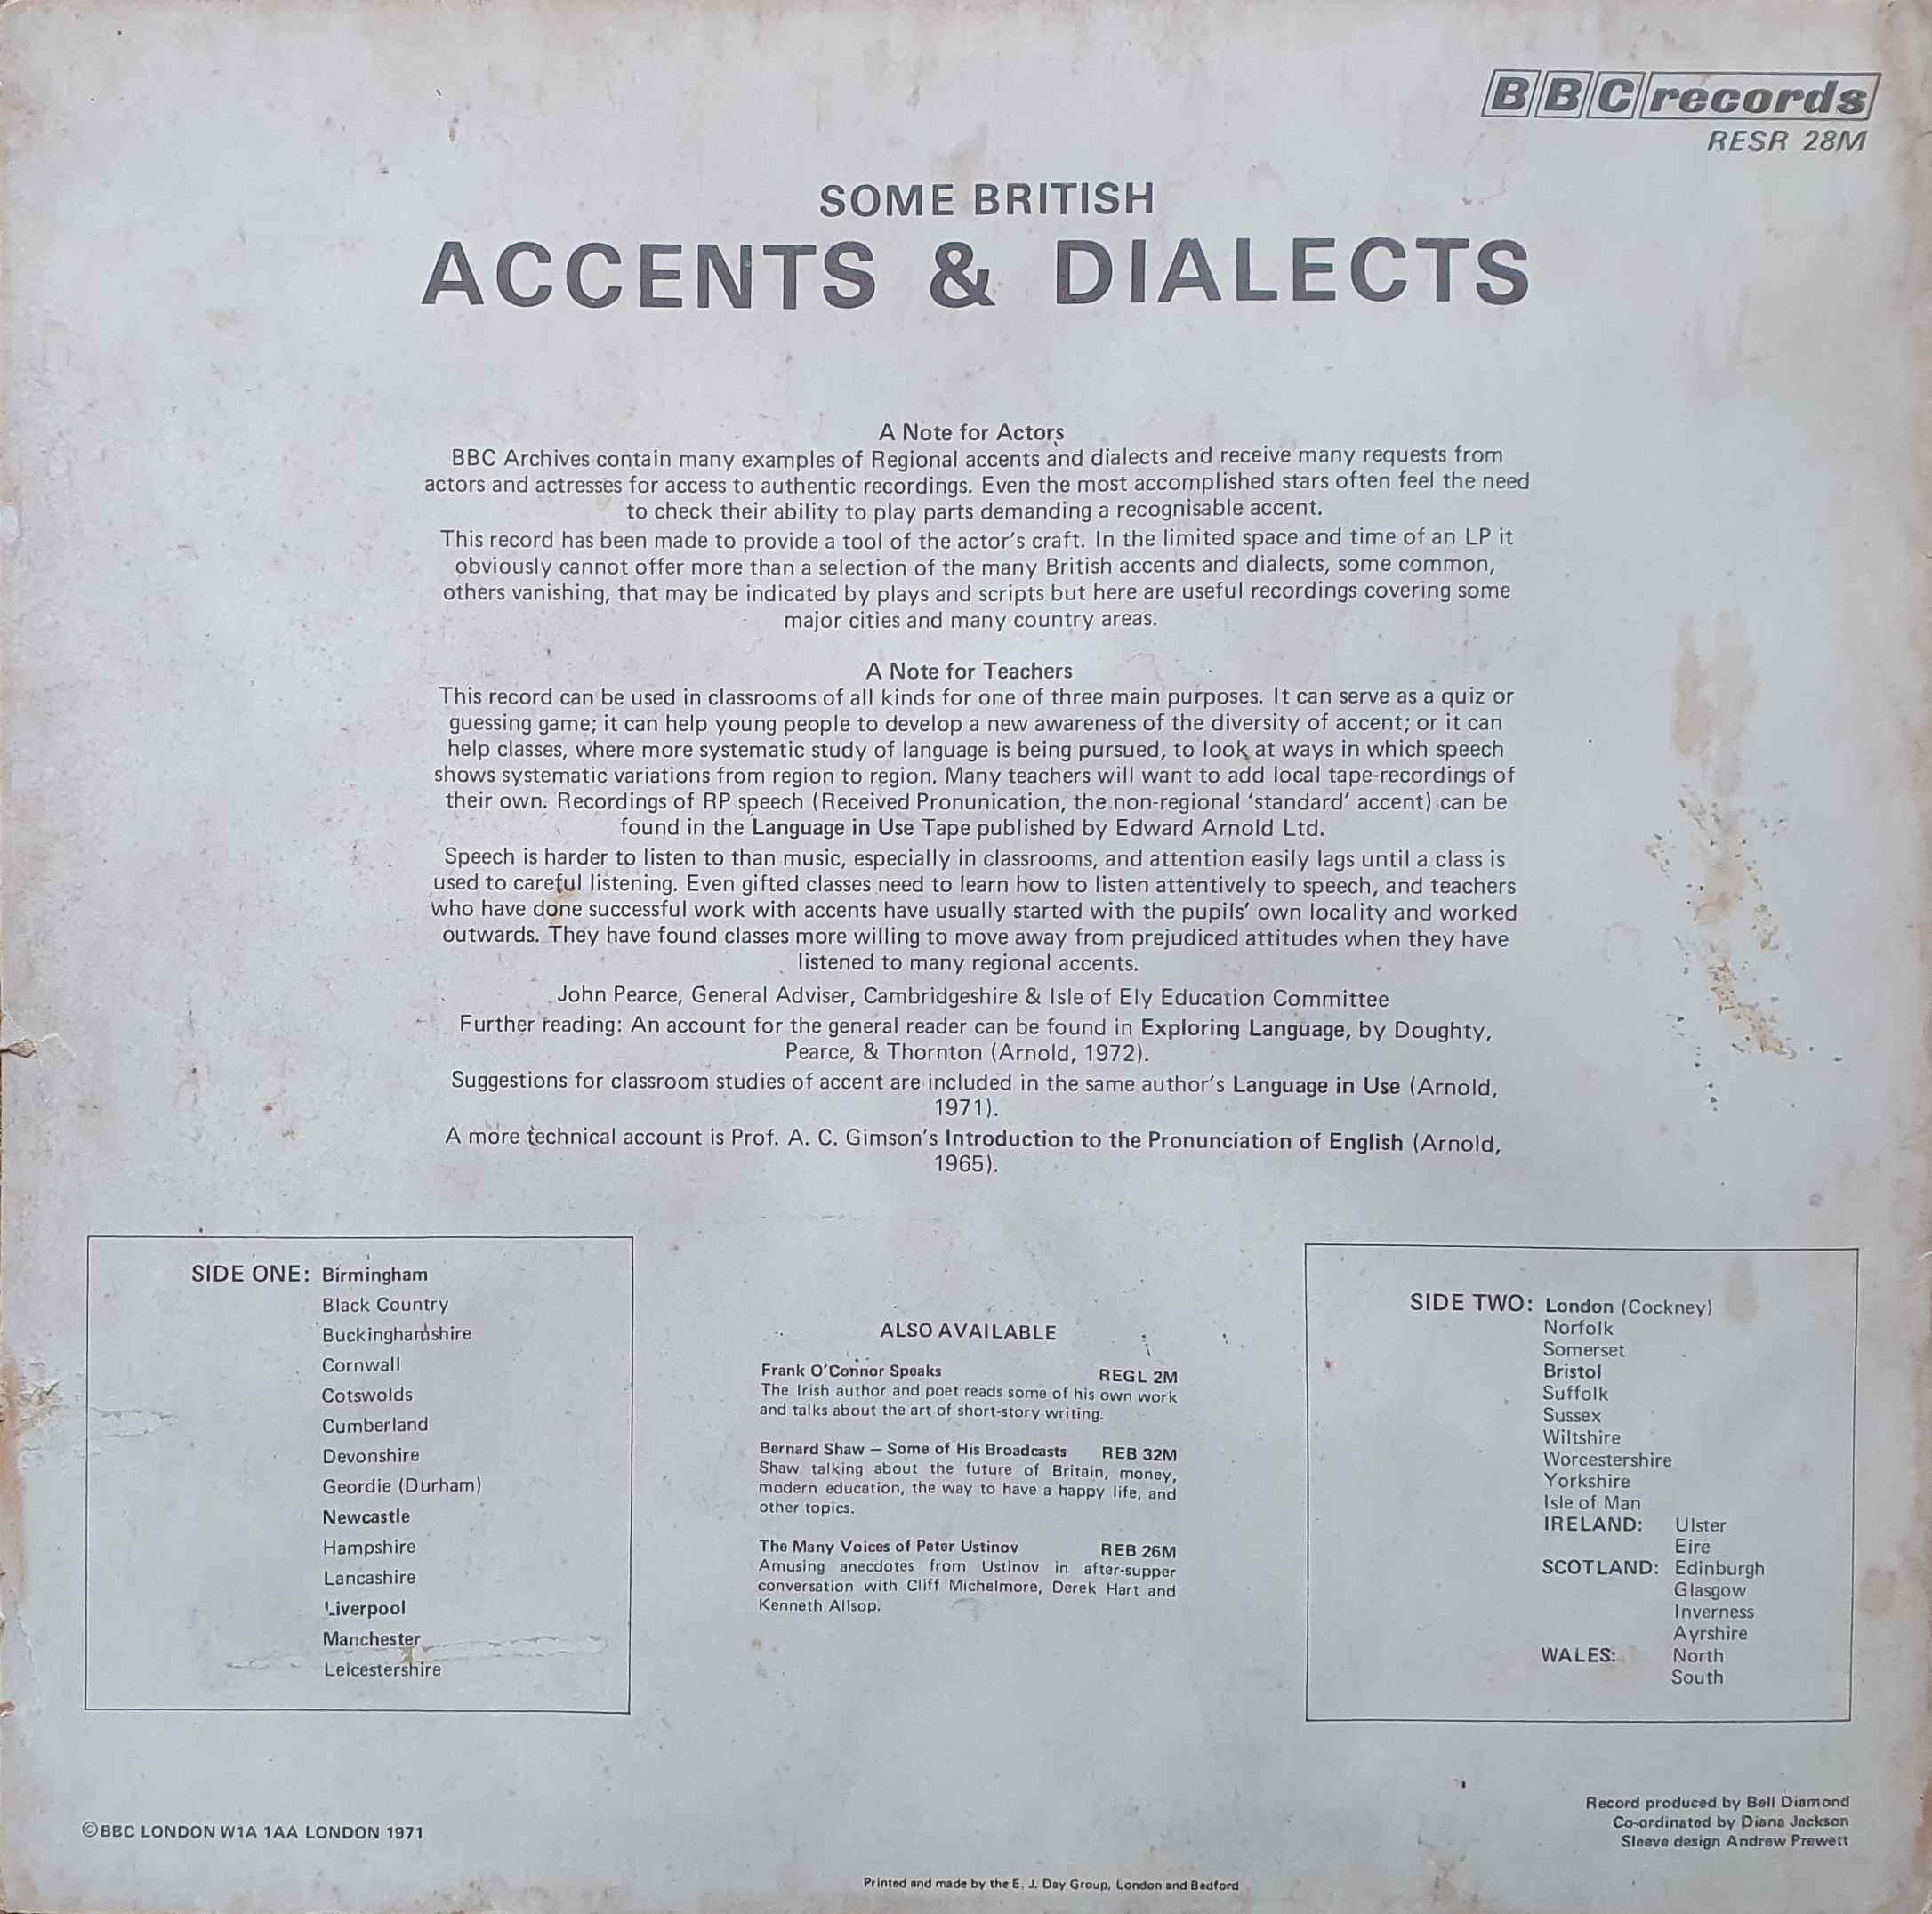 Picture of RESR 28 Some British accents and dialects by artist Various from the BBC records and Tapes library